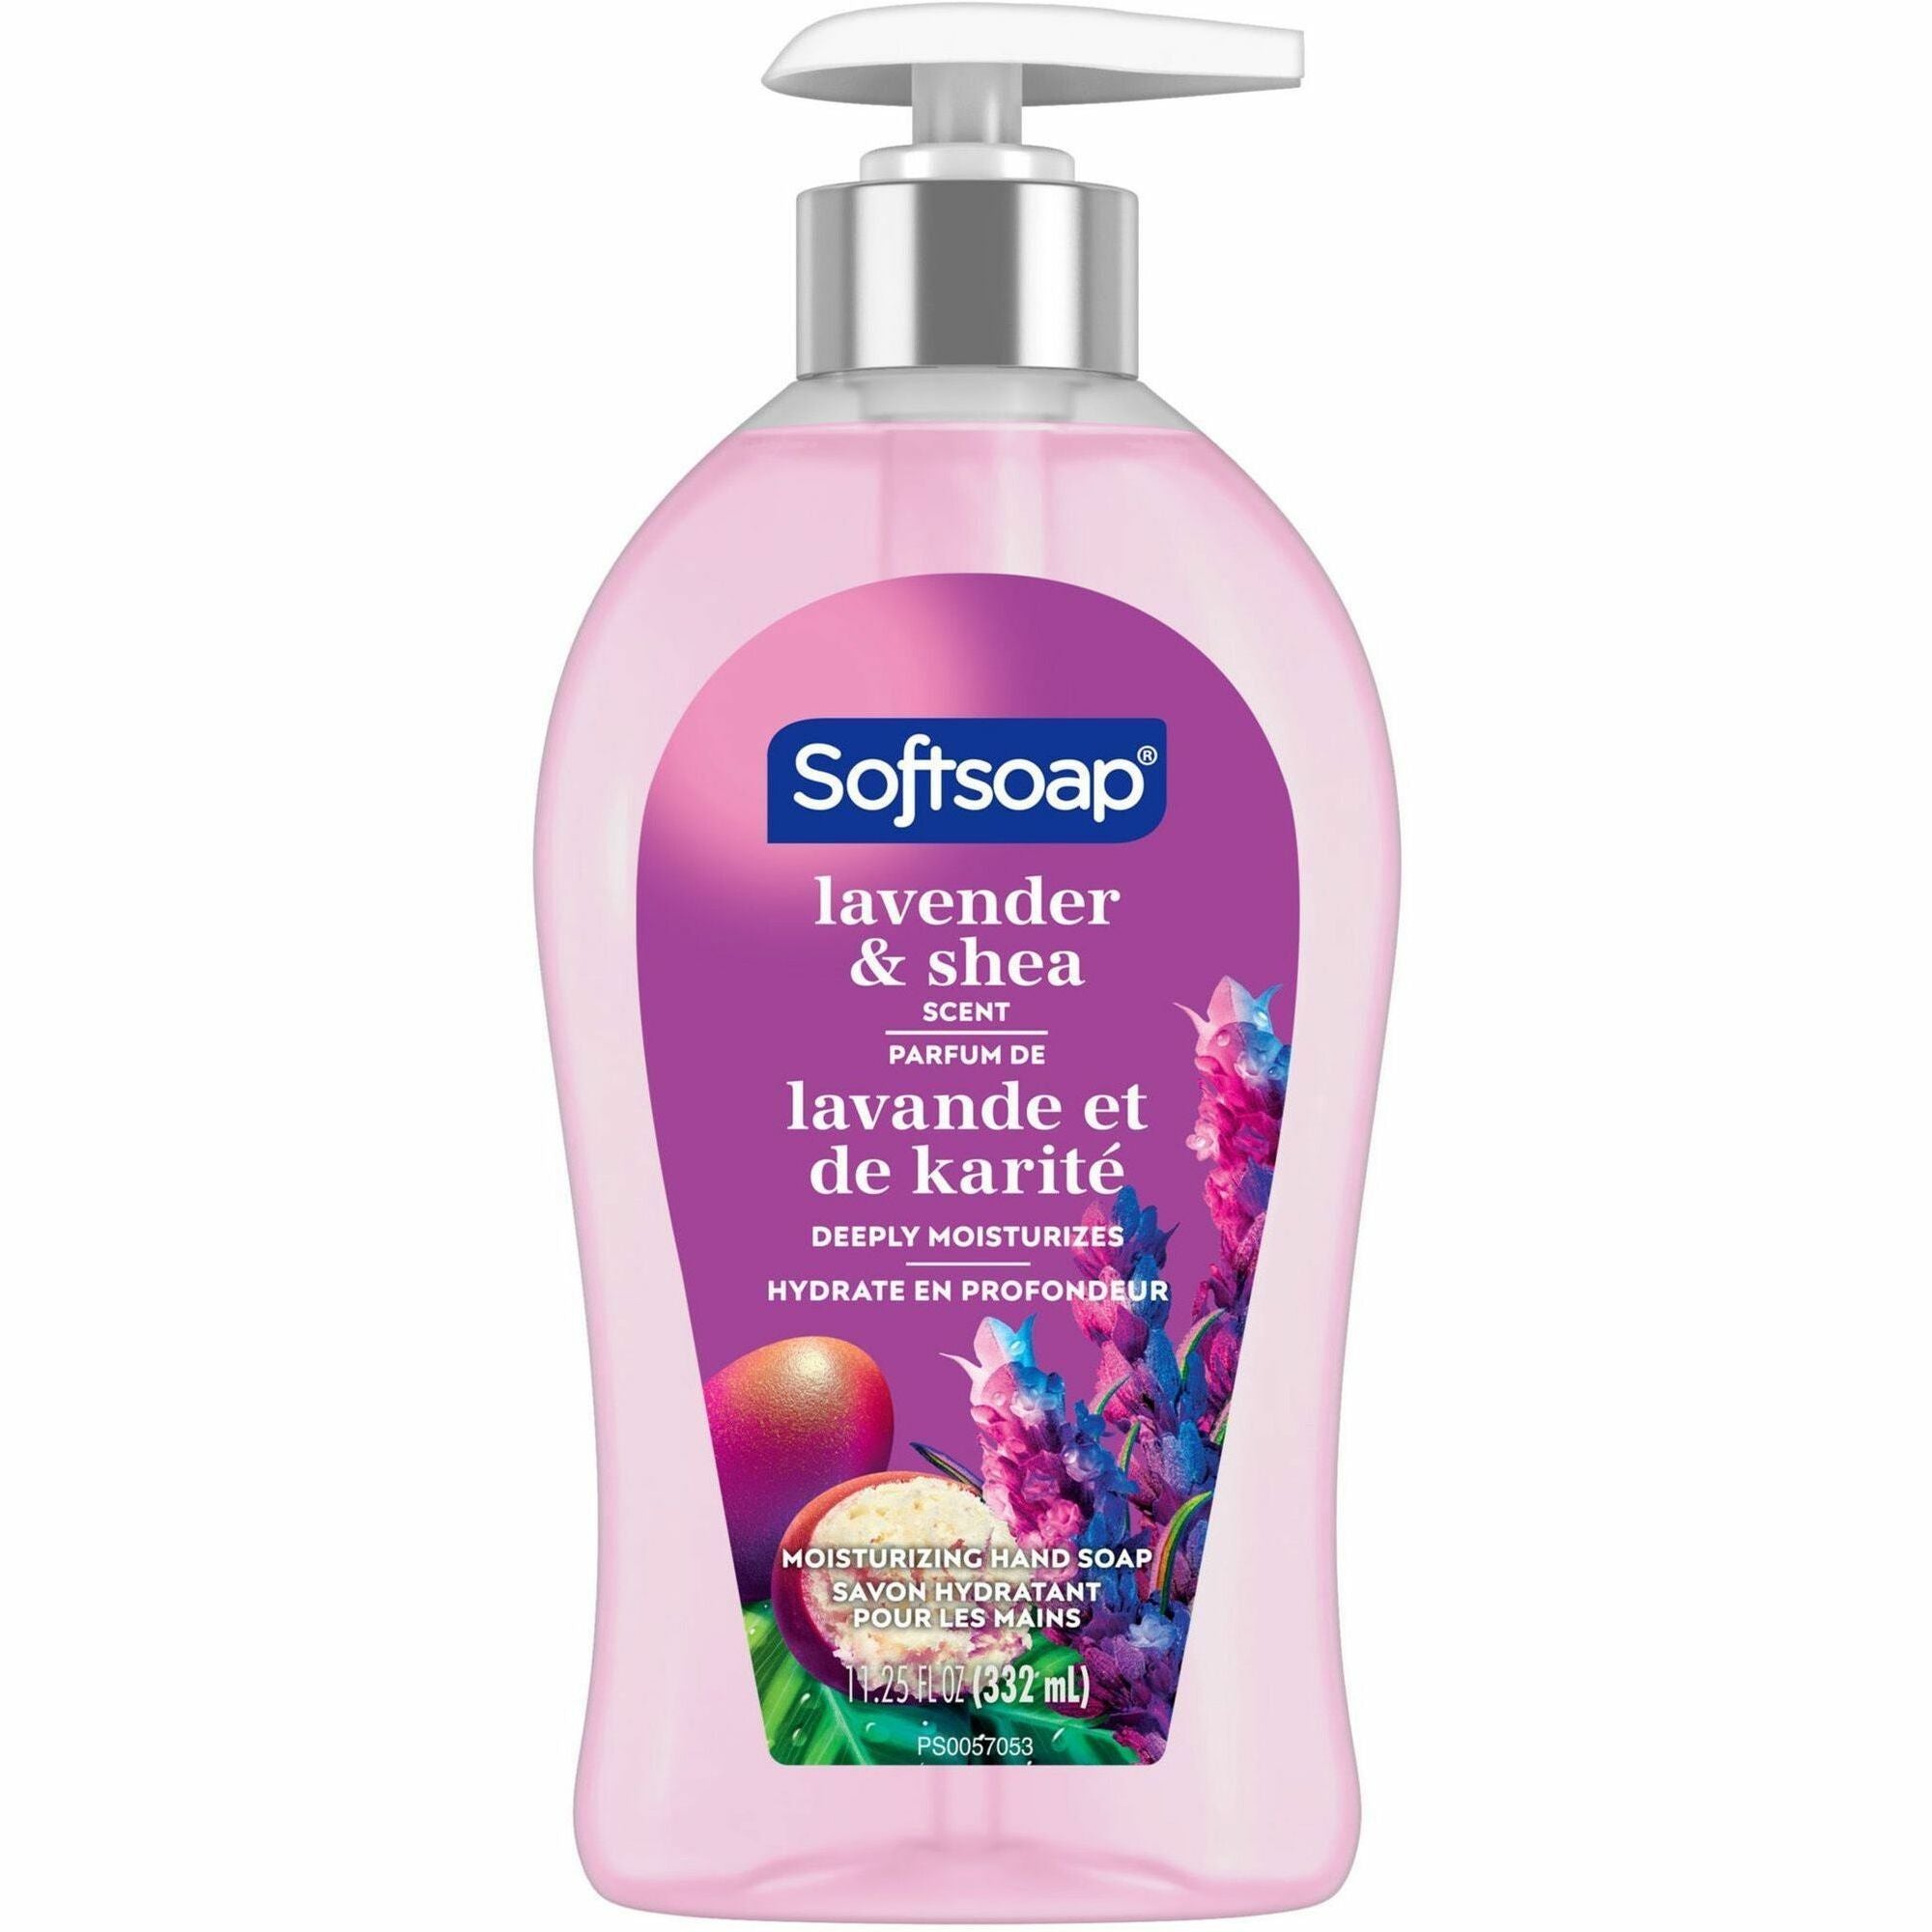 softsoap-lavender-hand-soap-lavender-&-shea-butter-scentfor-113-fl-oz-3327-ml-pump-bottle-dispenser-bacteria-remover-dirt-remover-hand-skin-moisturizing-purple-refillable-recyclable-paraben-free-phthalate-free-biodegradable_cpcus07058a - 1